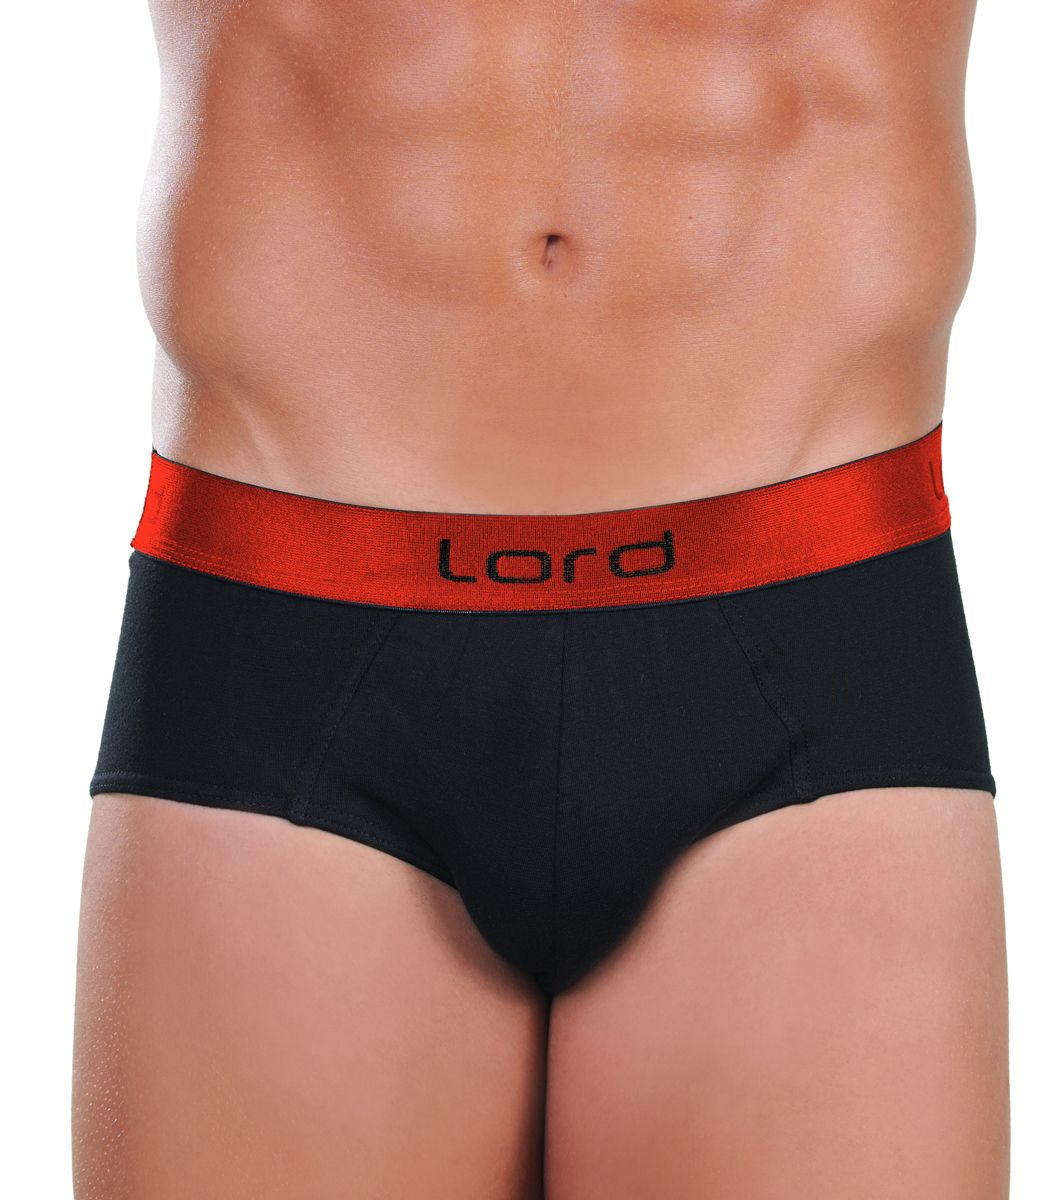  Brief & Boxer XXL Sizes Lord Lord Brief Shine, oversized 1530-3